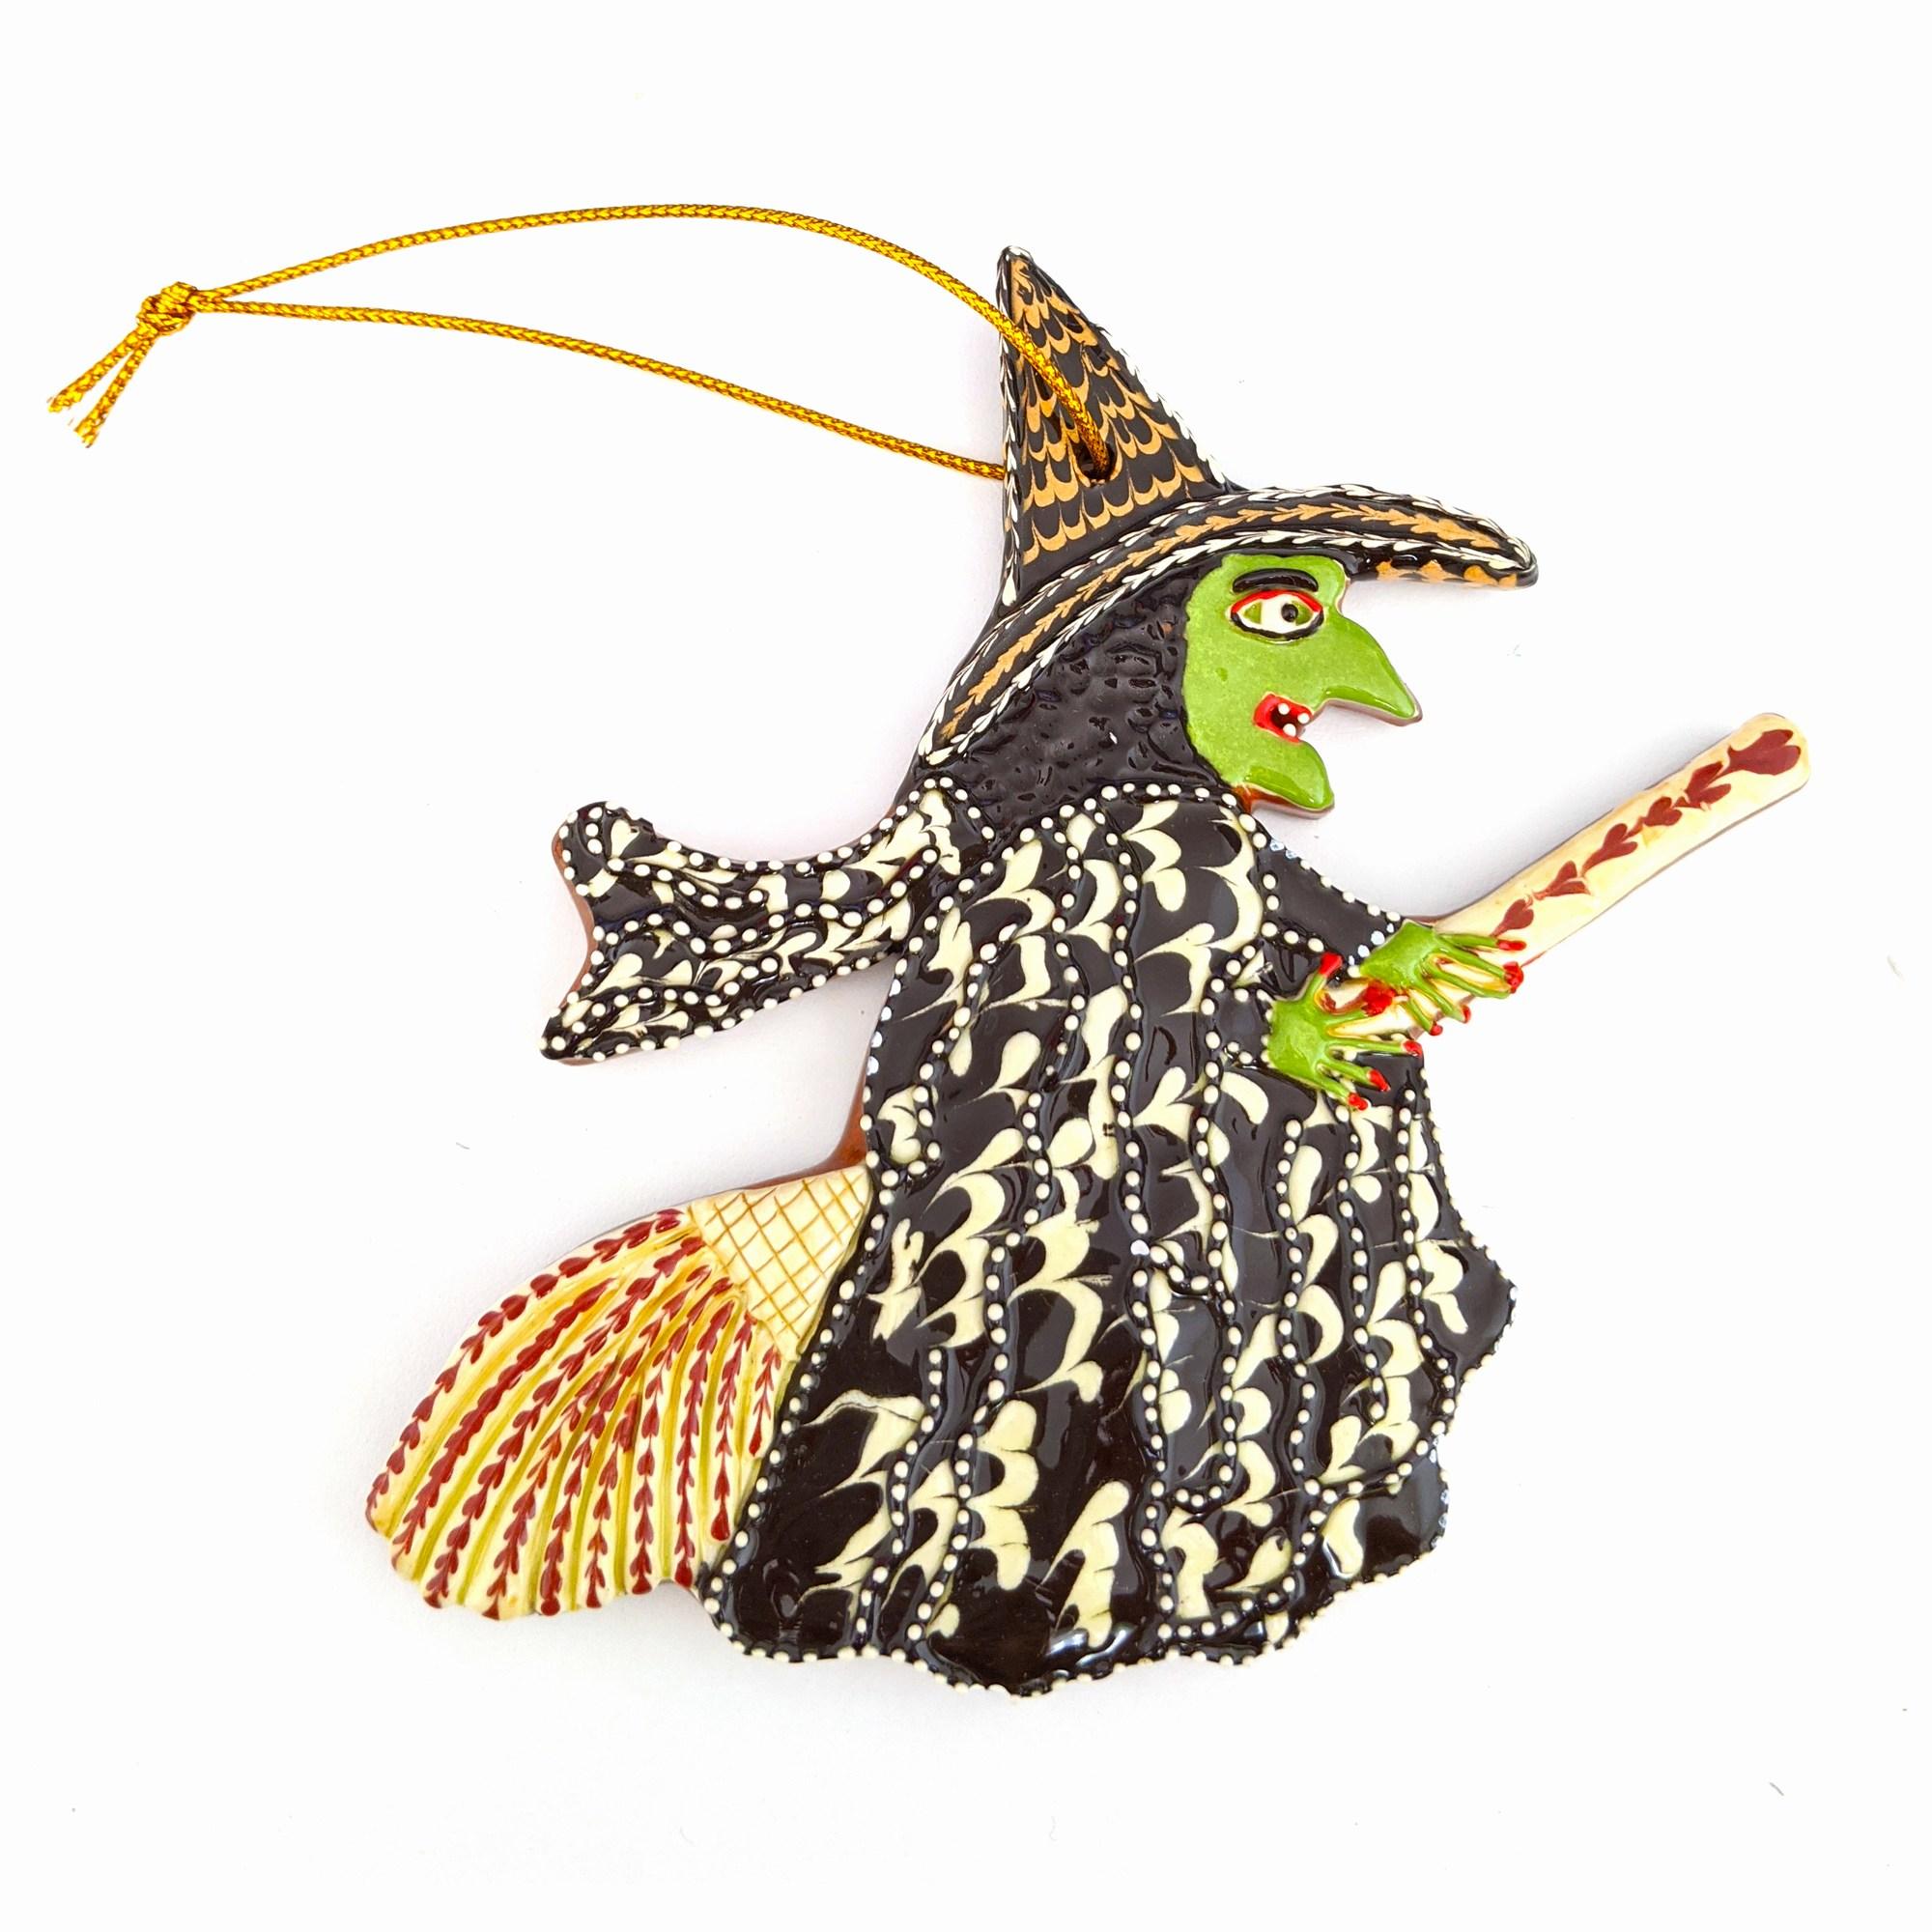 Wicked Witch (from "The Oz Collection") - Art by Irma Starr